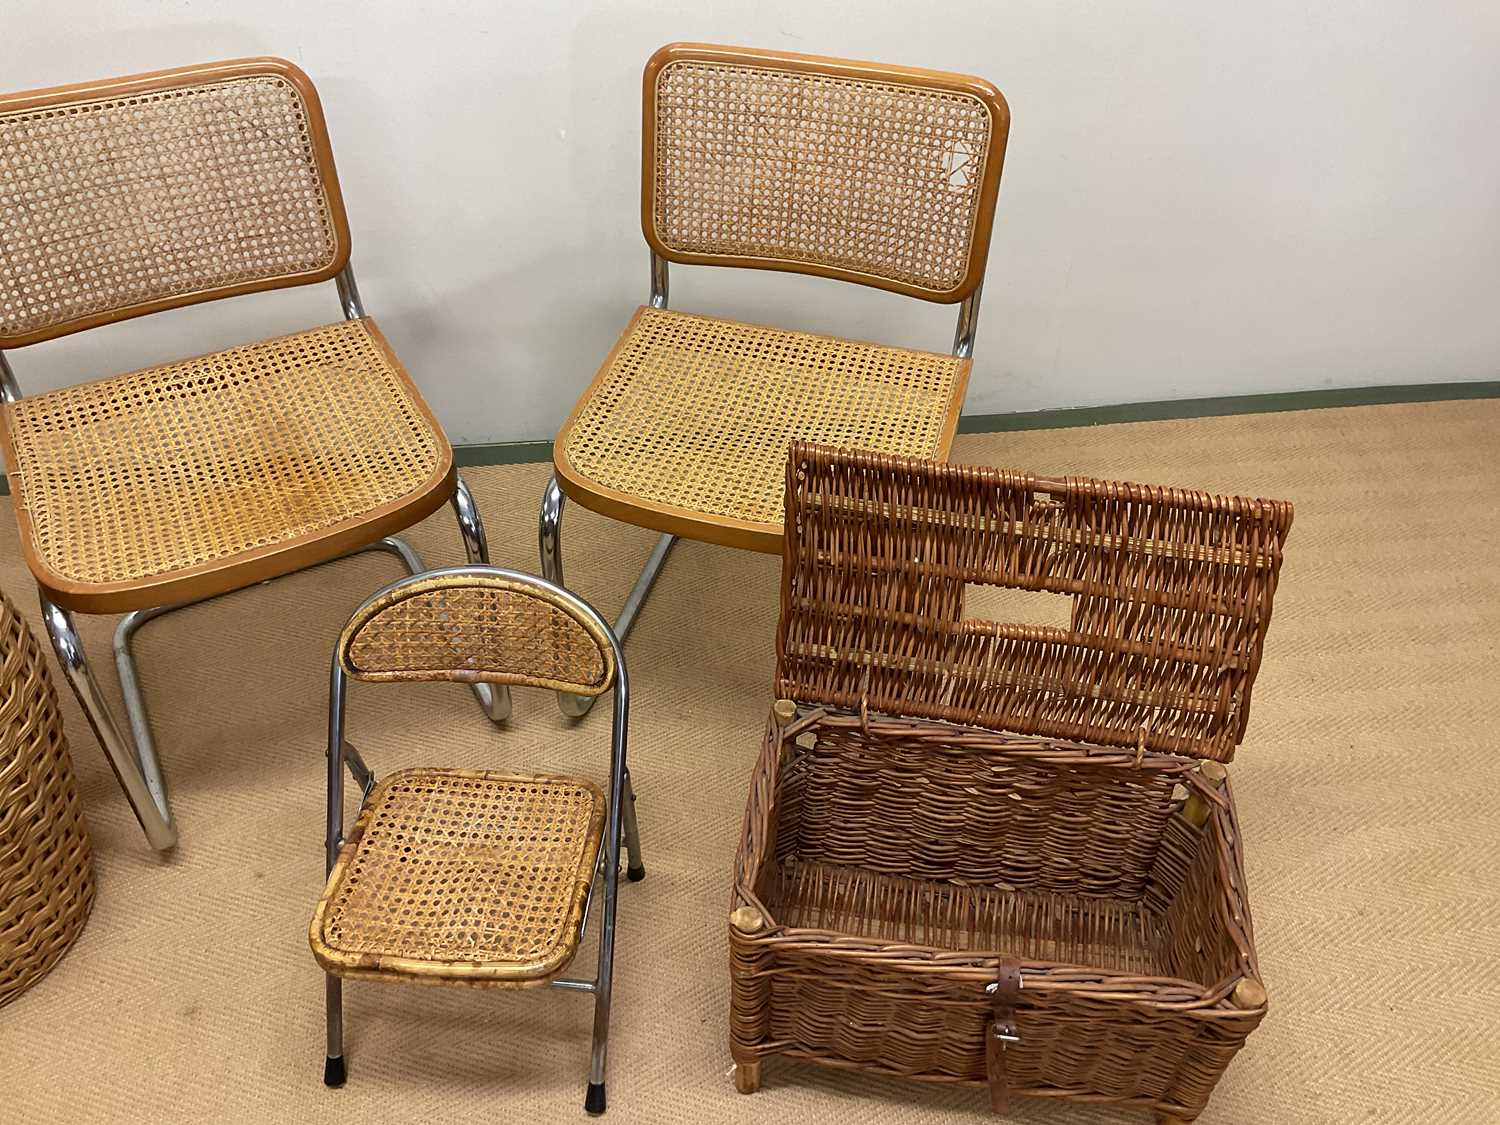 Pair of chrome and rattan chairs, a child's folding rattan chair and various wicker items. - Image 4 of 7